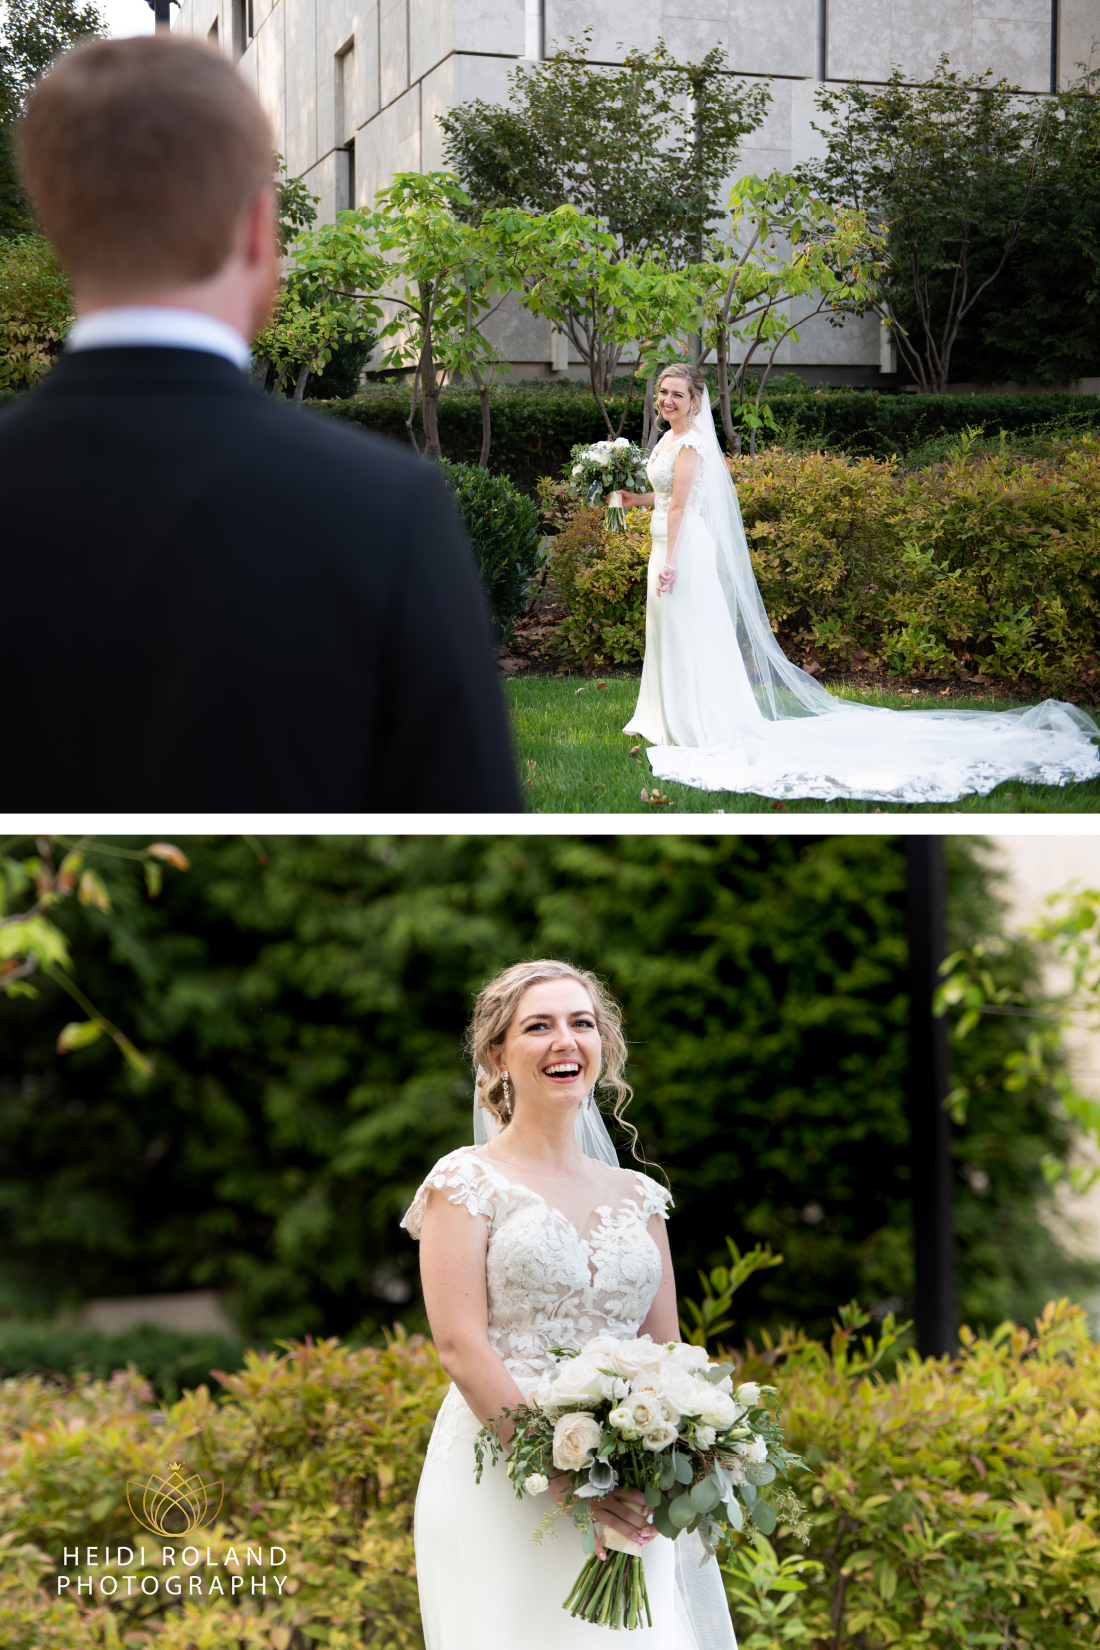 Bride smiling surrounded by foliage at the Barnes Foundation in Philadelphia